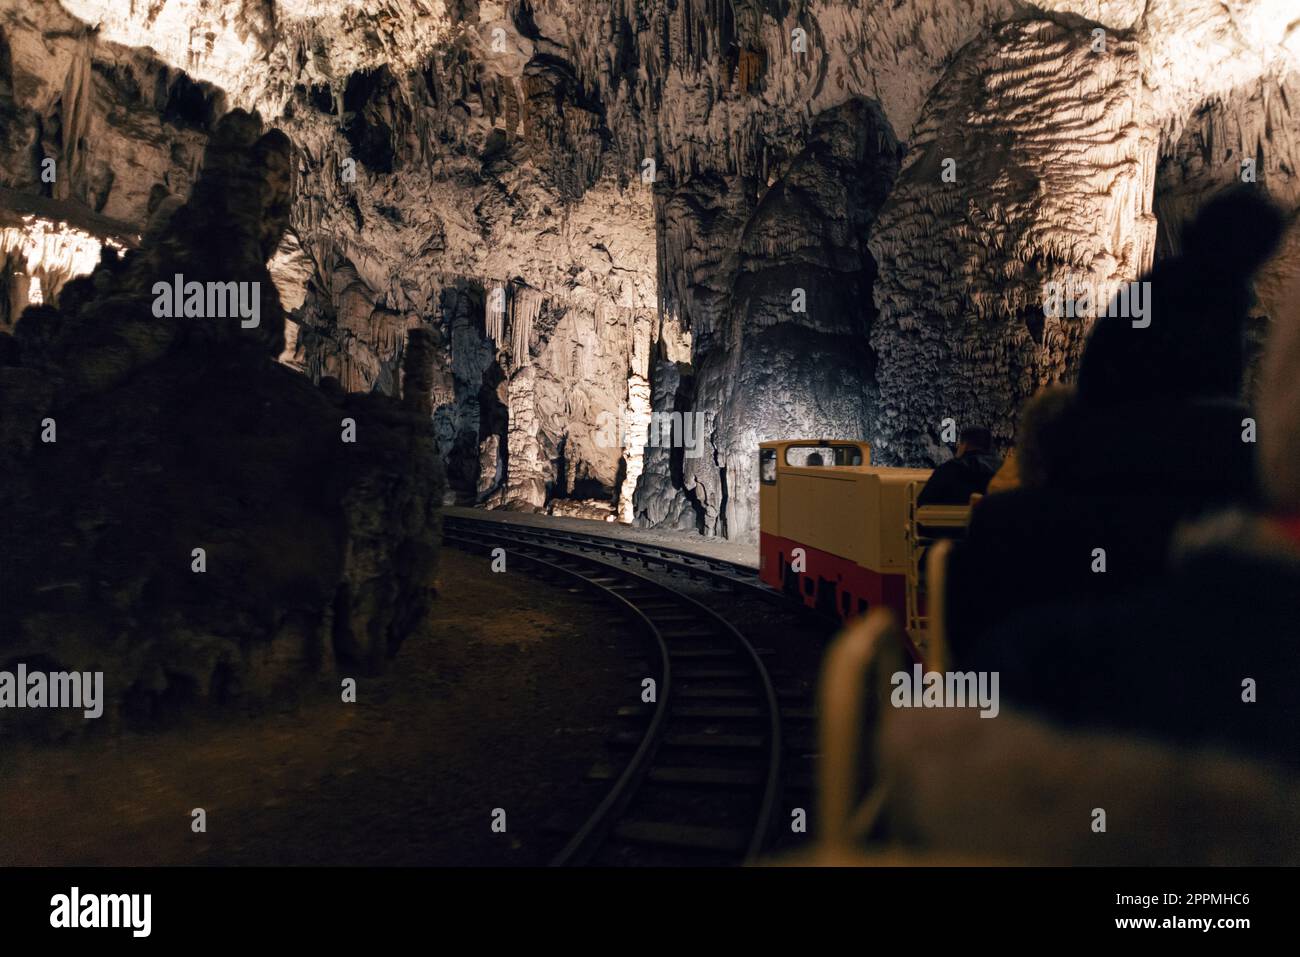 Karst cave with a railway Stock Photo